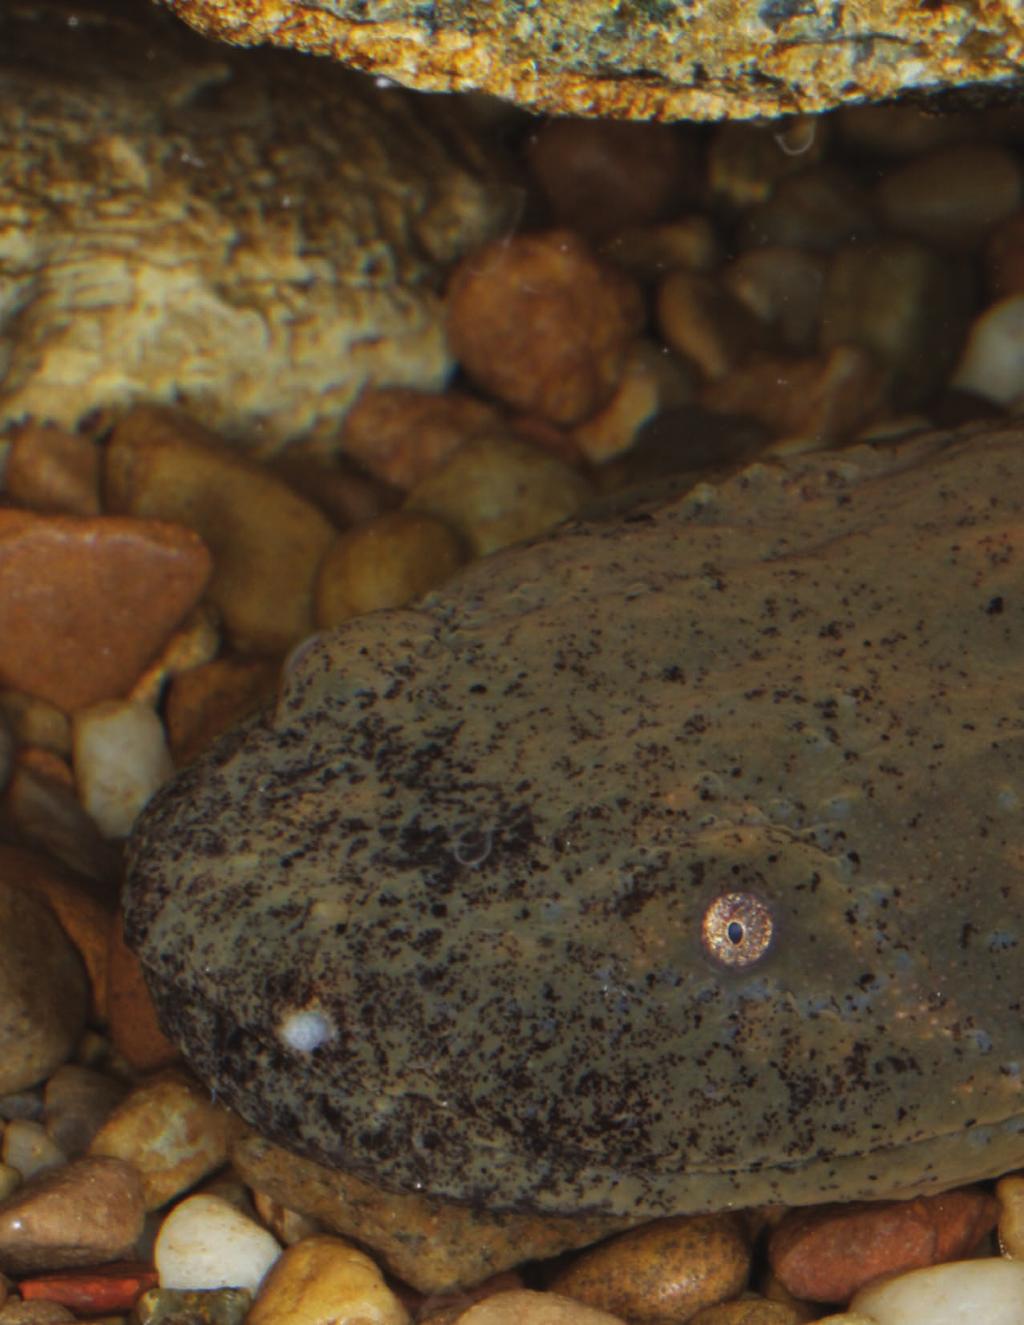 Eastern hellbenders are the only giant salamanders found in North America. In the past decade, the New York population has declined by 40% across their range.